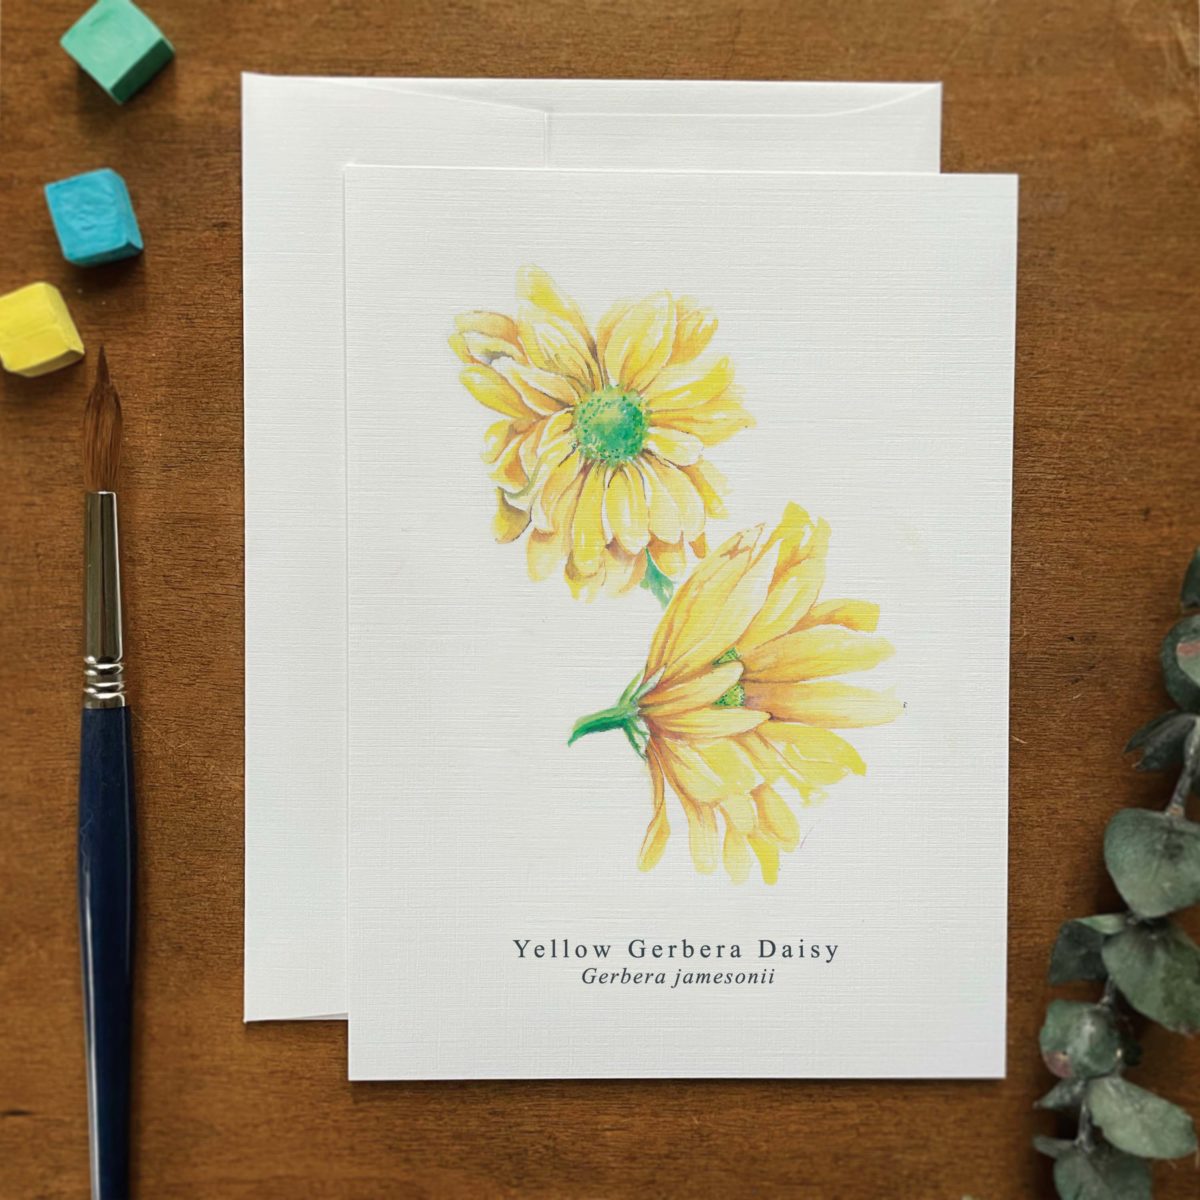 A2 greeting card of two Yellow Gerbera Daisies